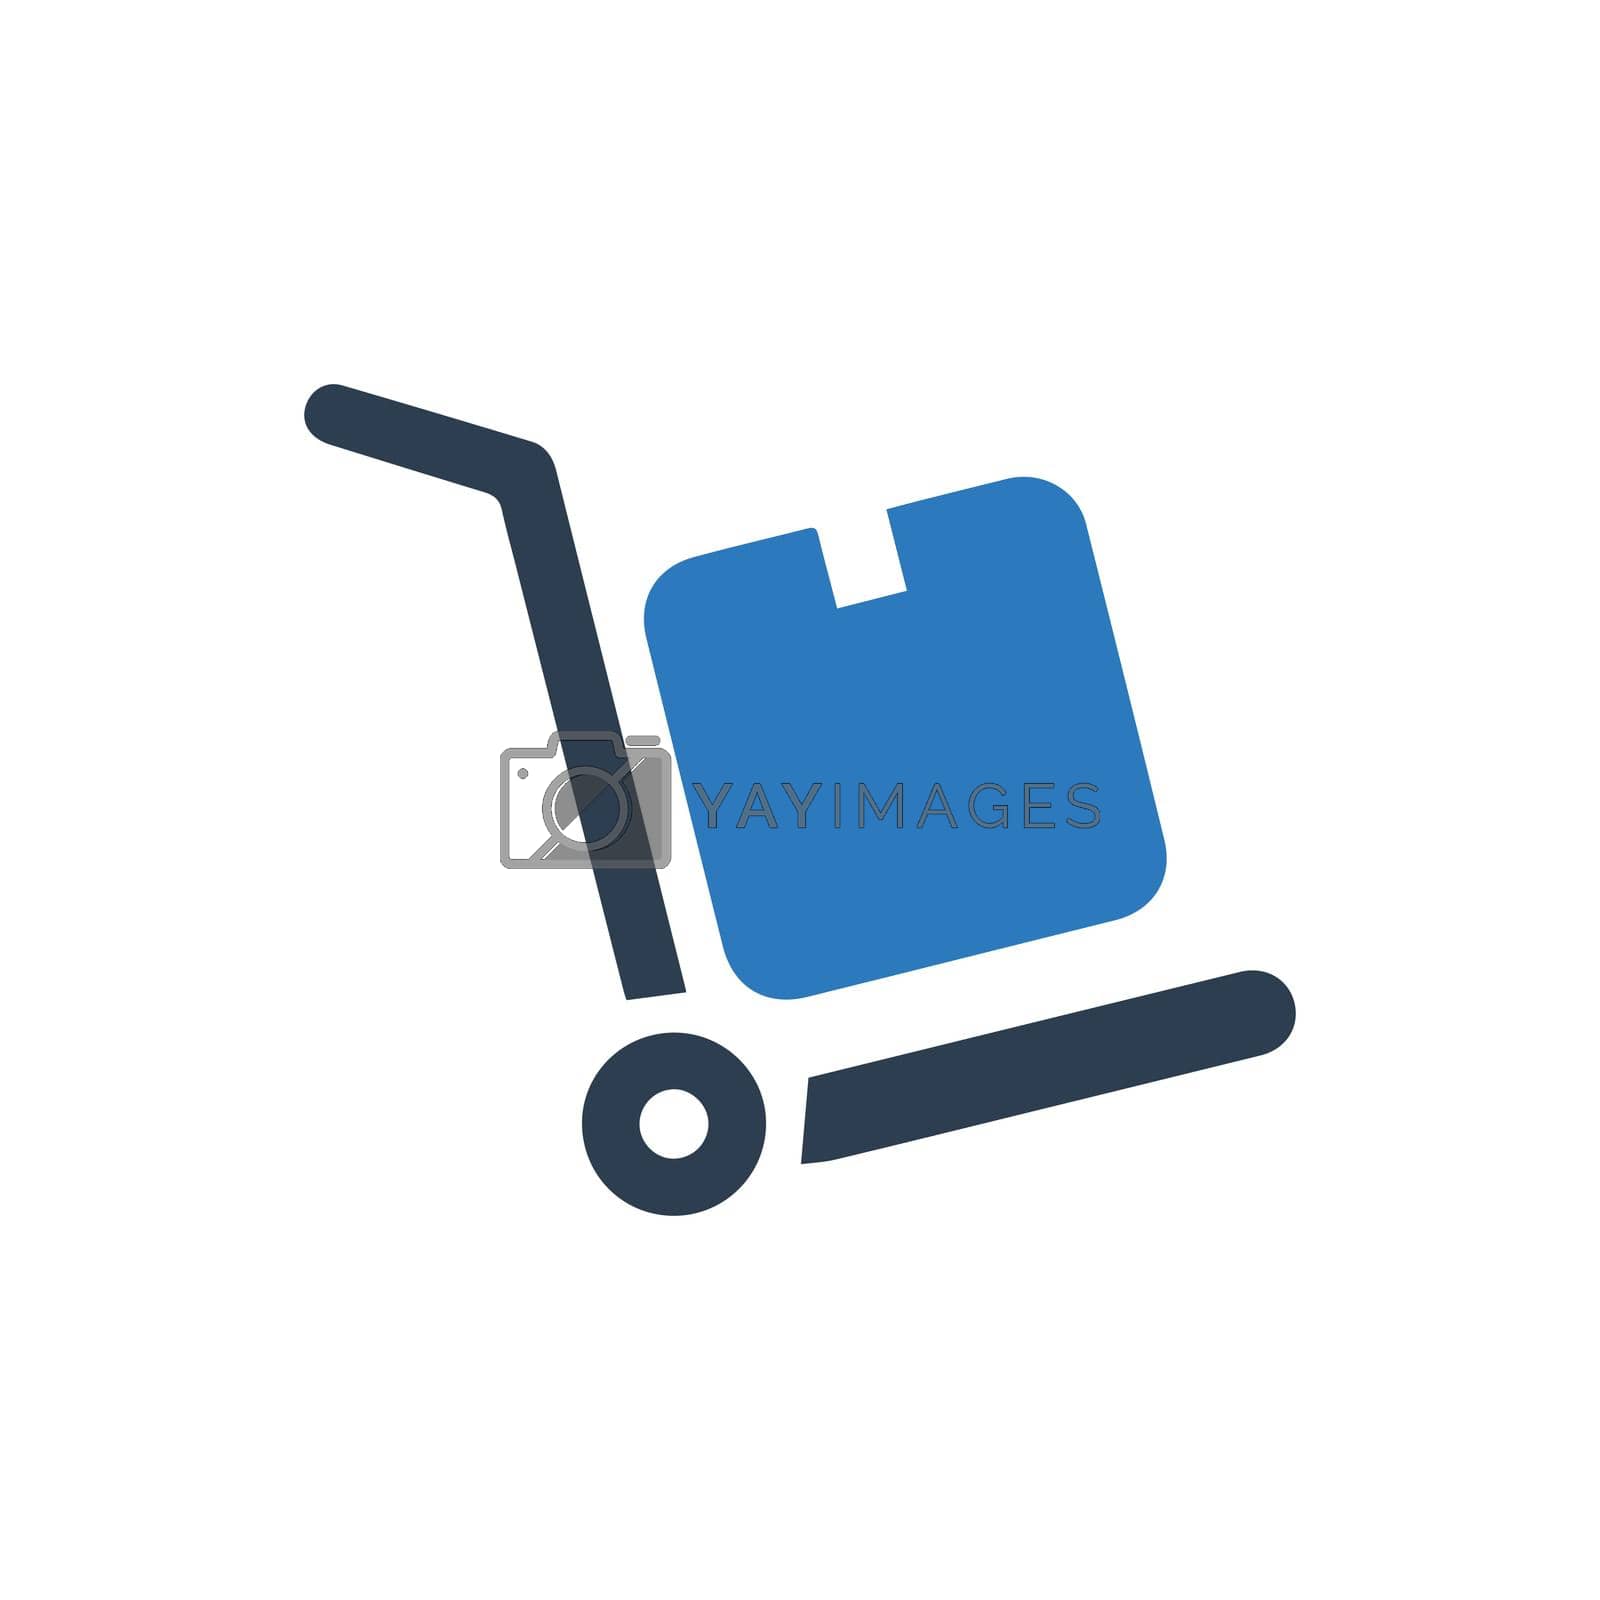 Royalty free image of Shipping Trolley Icon by delwar018